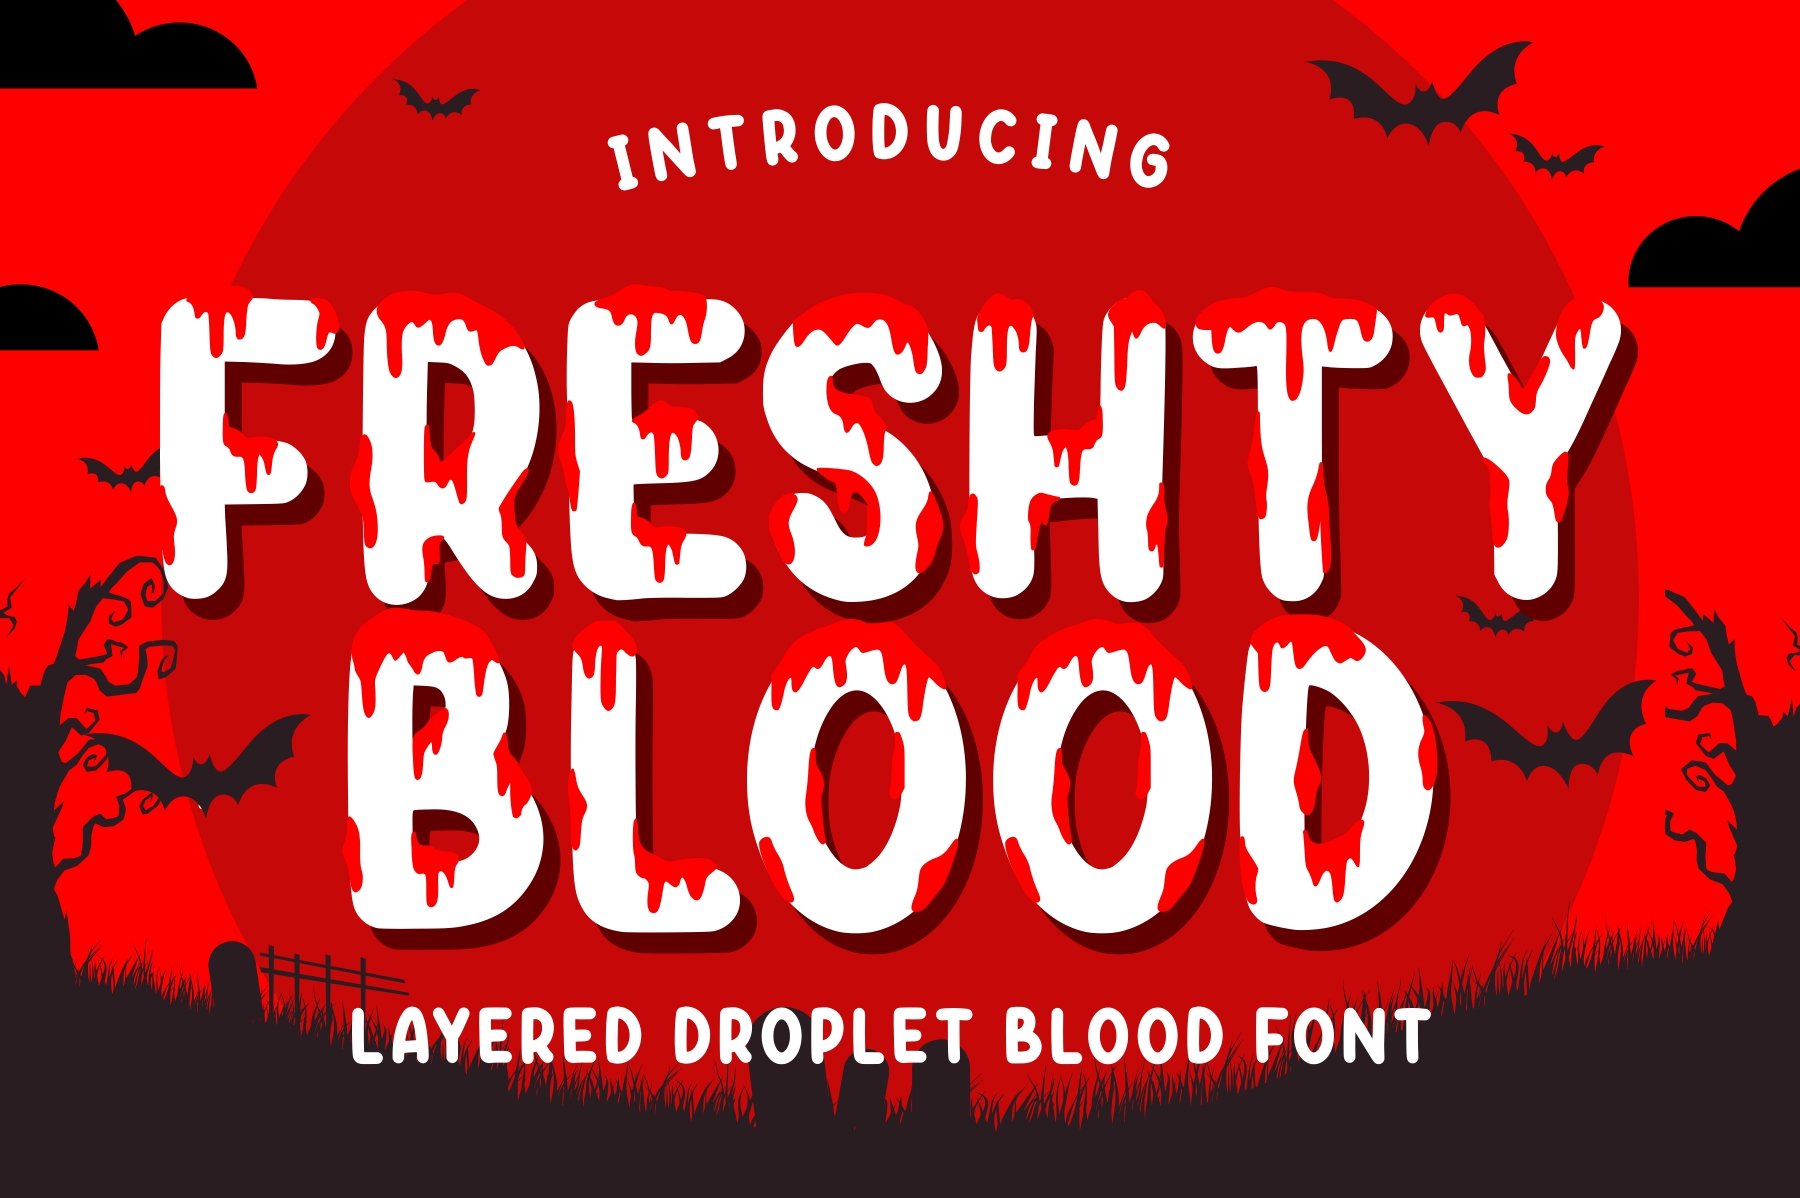 Freshty Blood - Layered Droplet cover image.